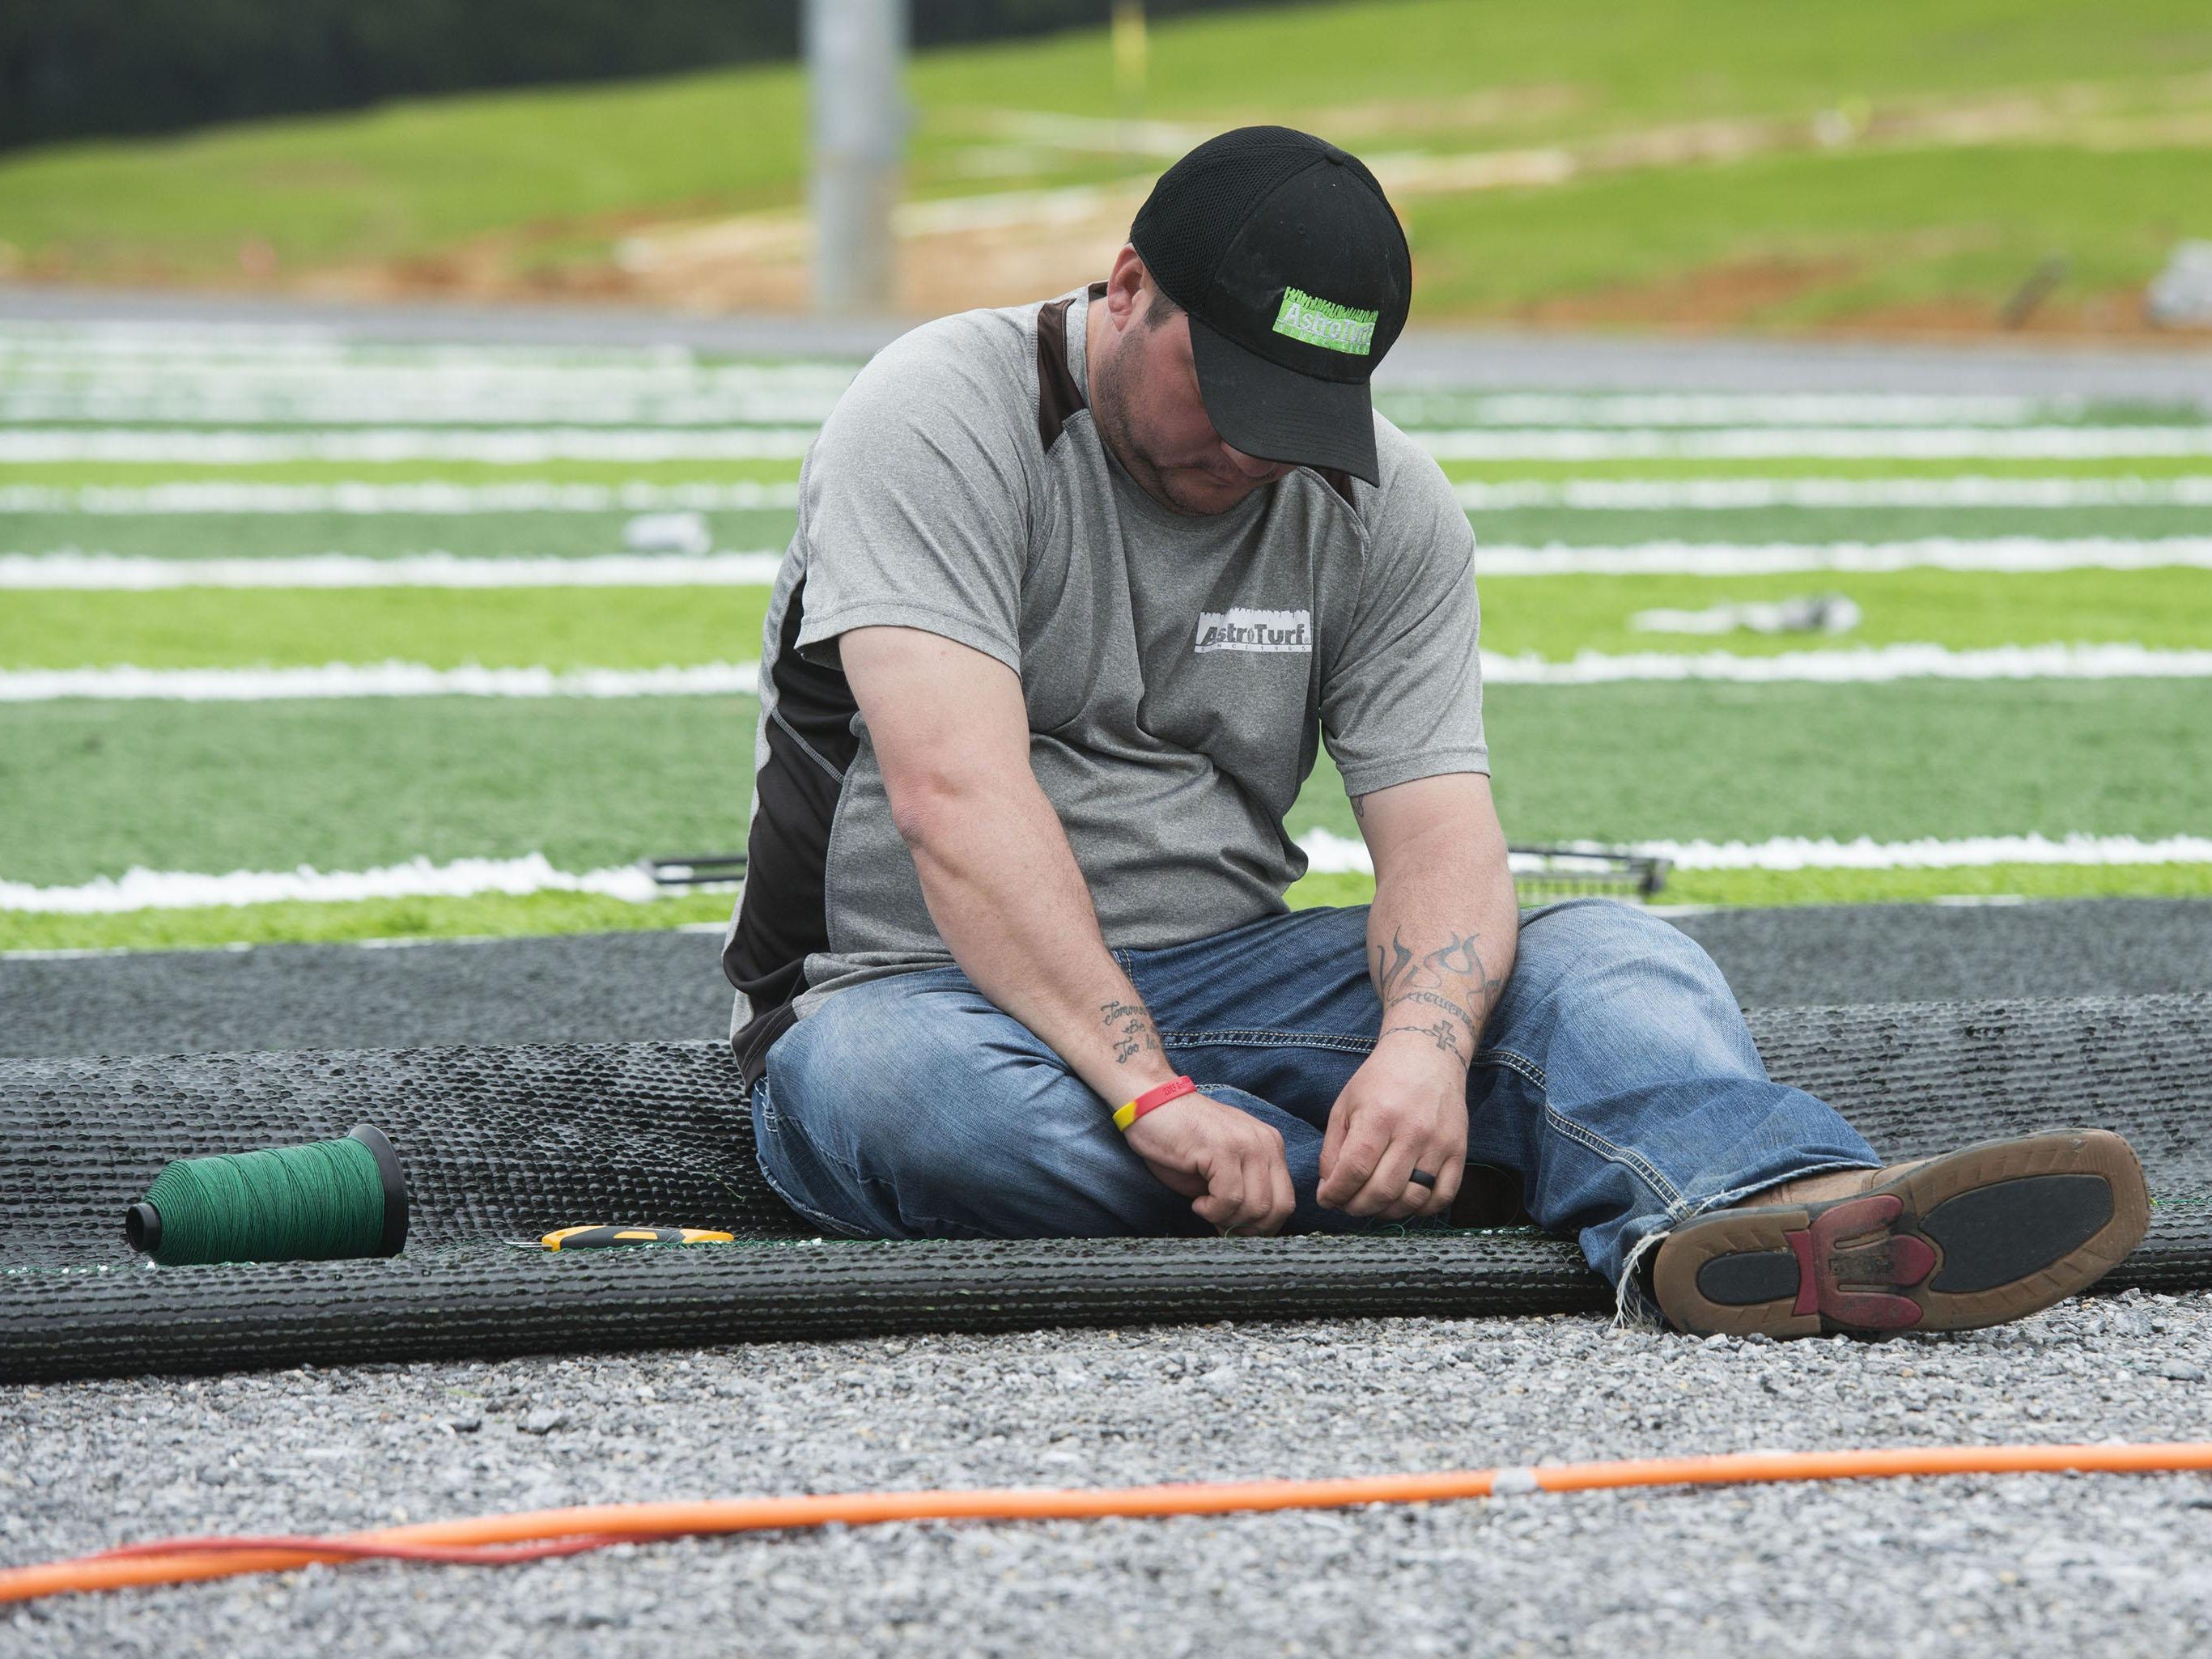 Corey King, left, and Conner Whitener, right, uses an air driven sewing machine to stitch together sections of AstroTurf during the installation of the new playing surface at University of West Football facility Friday morning Jan. 8, 2016.